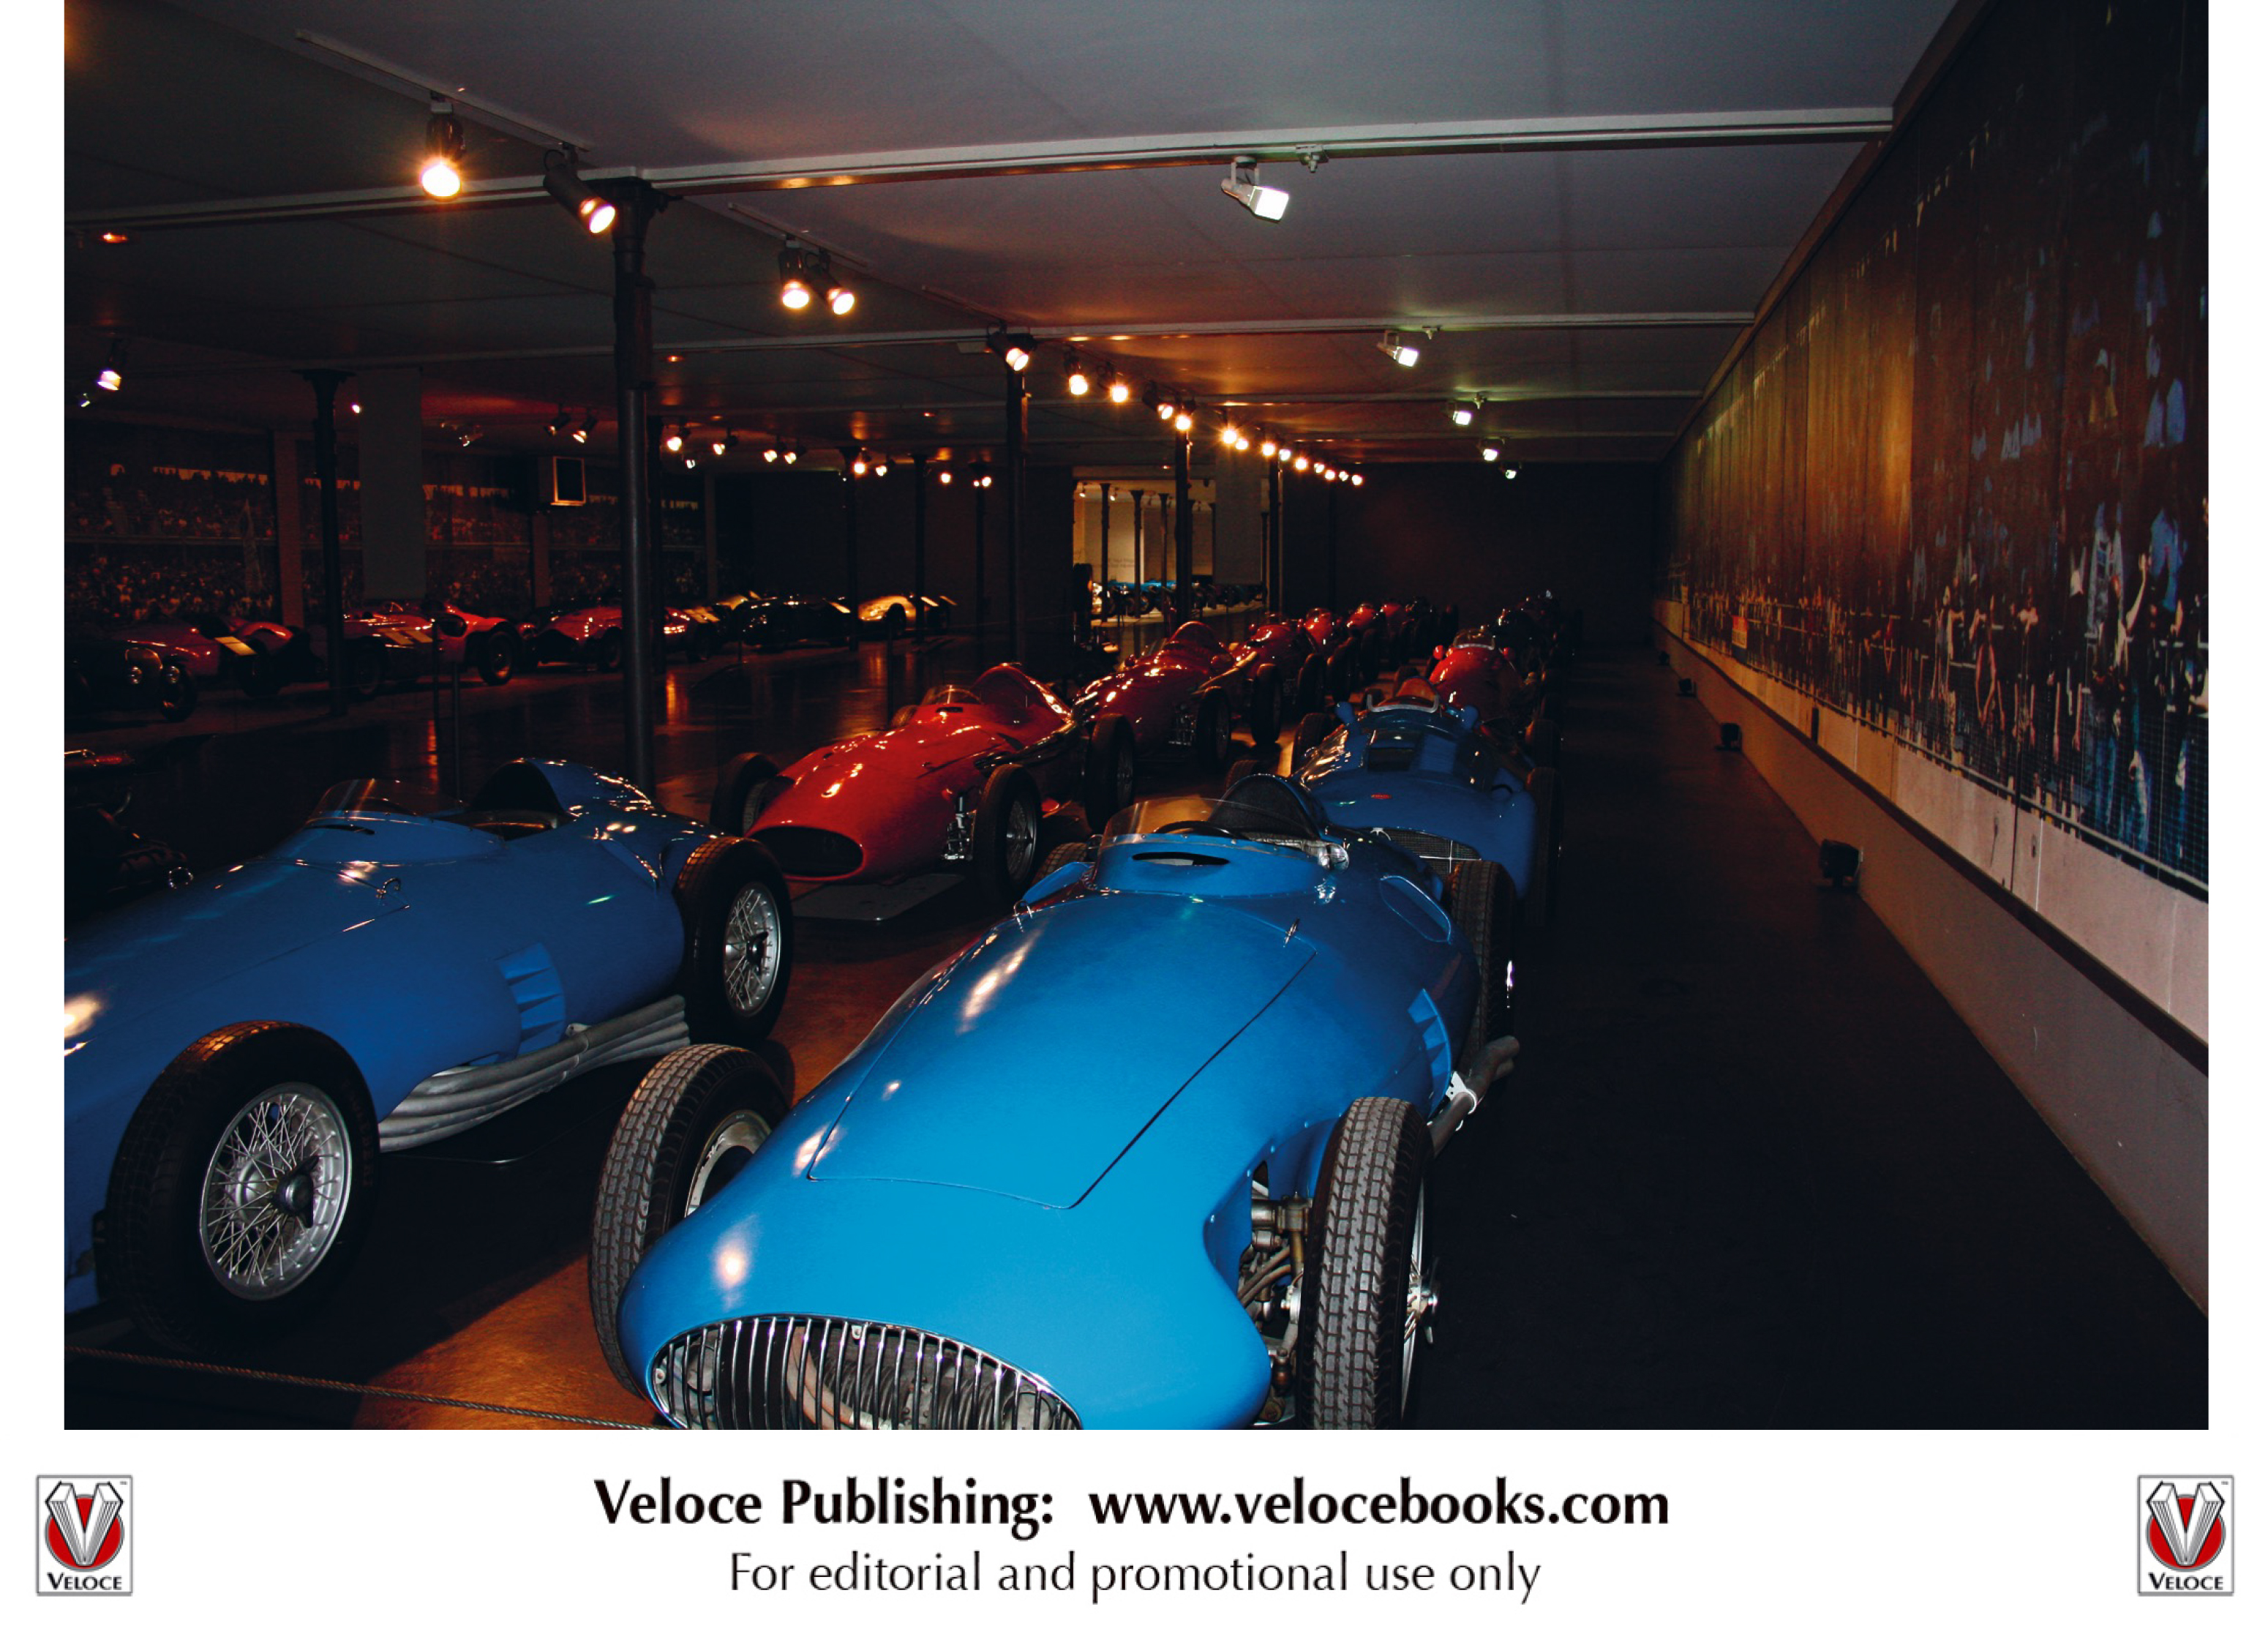 Schlumpf – The intrigue behind the most beautiful car collection in the world by Ard op de Weegh